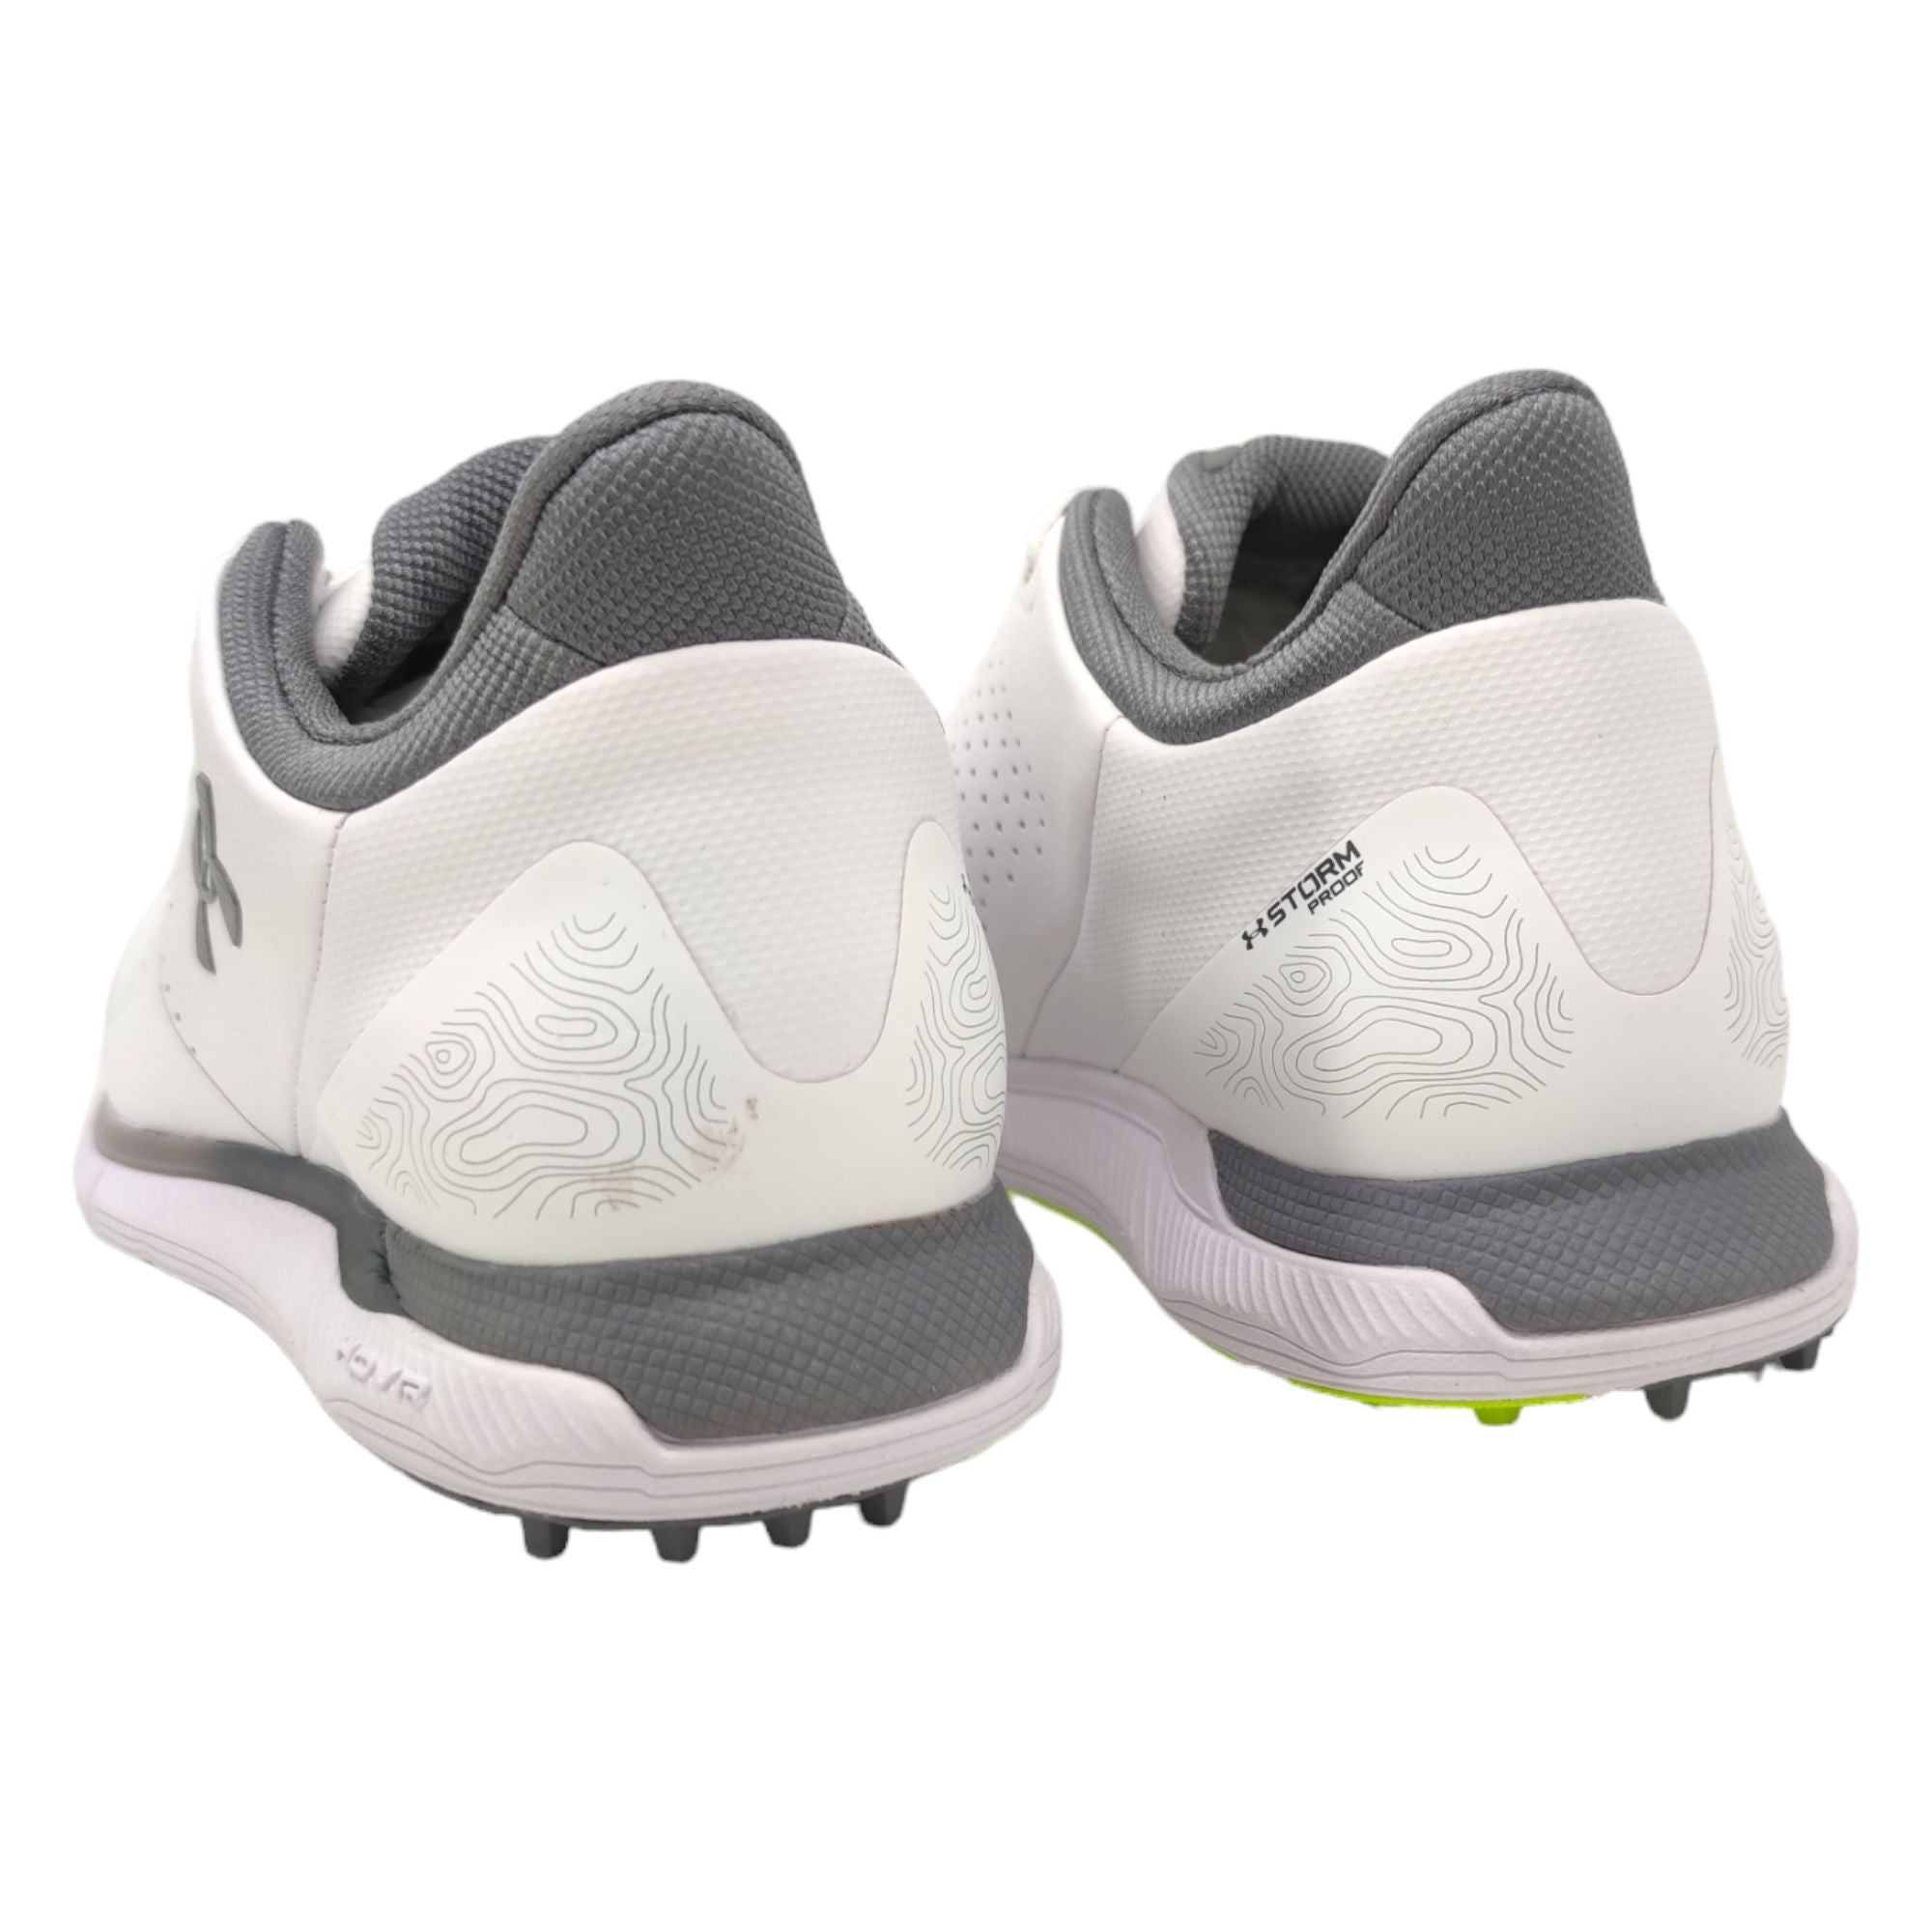 Men's Drive Fade Spikeless Golf Shoes White 